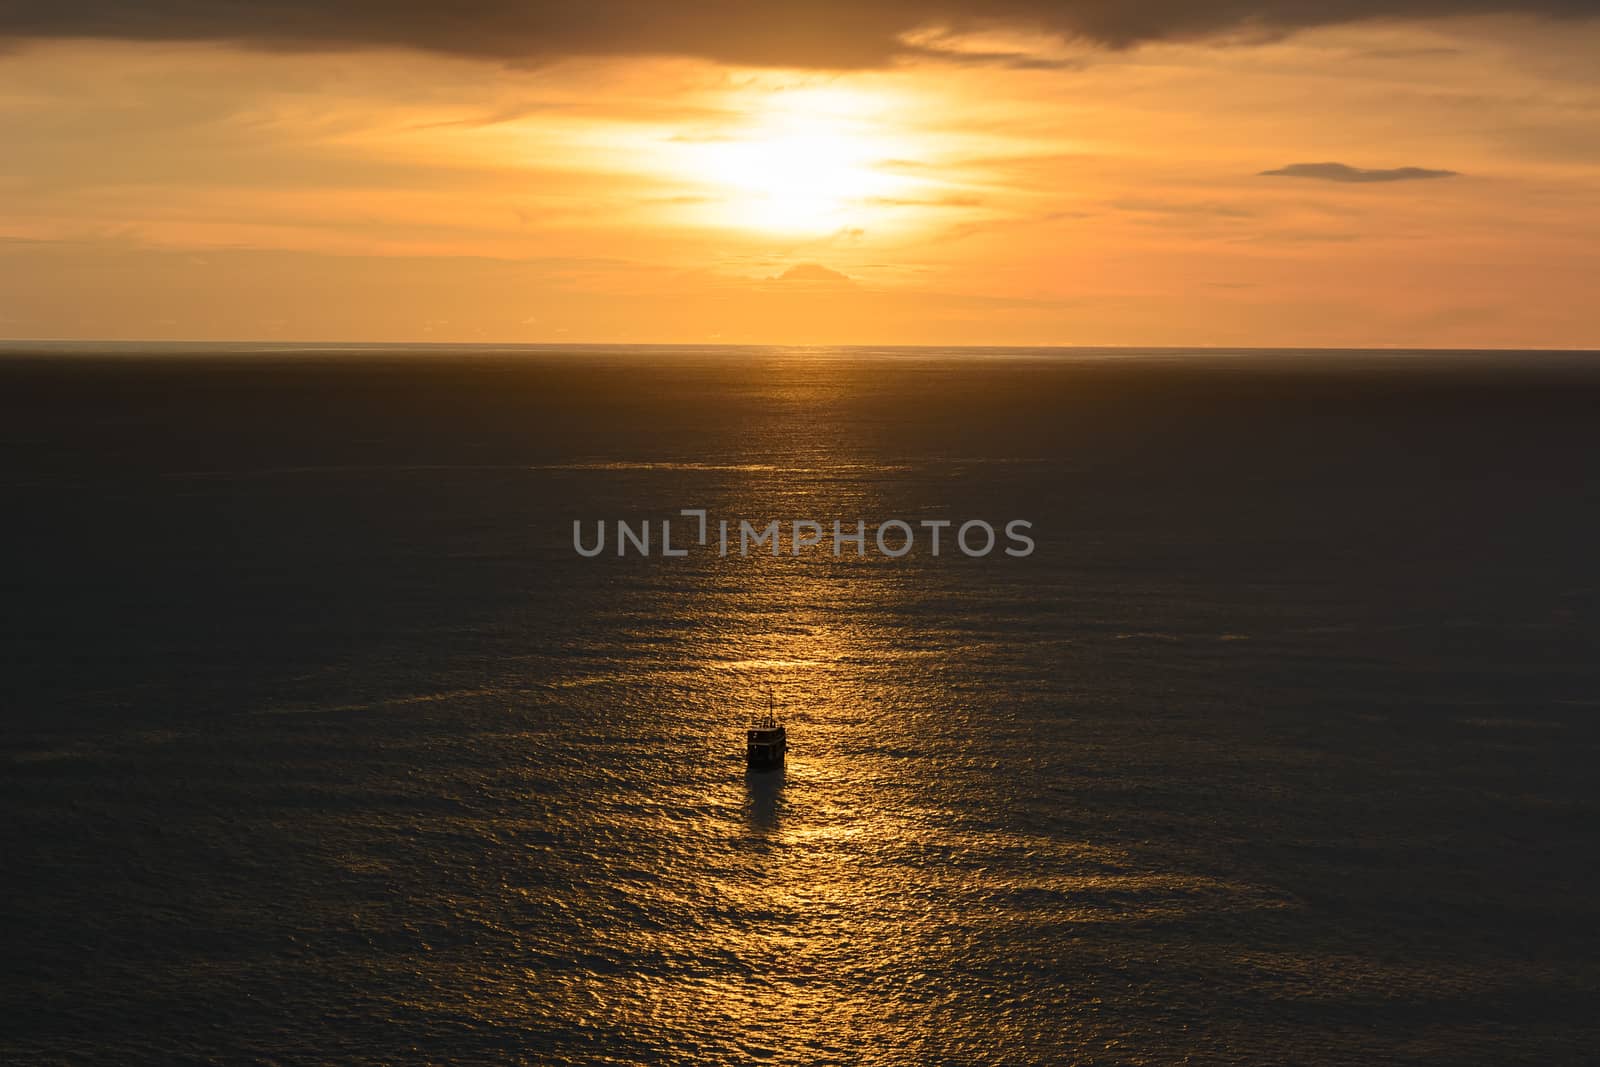 Old ancient ship on peaceful ocean at sunset. Calm waves reflect by ahimaone